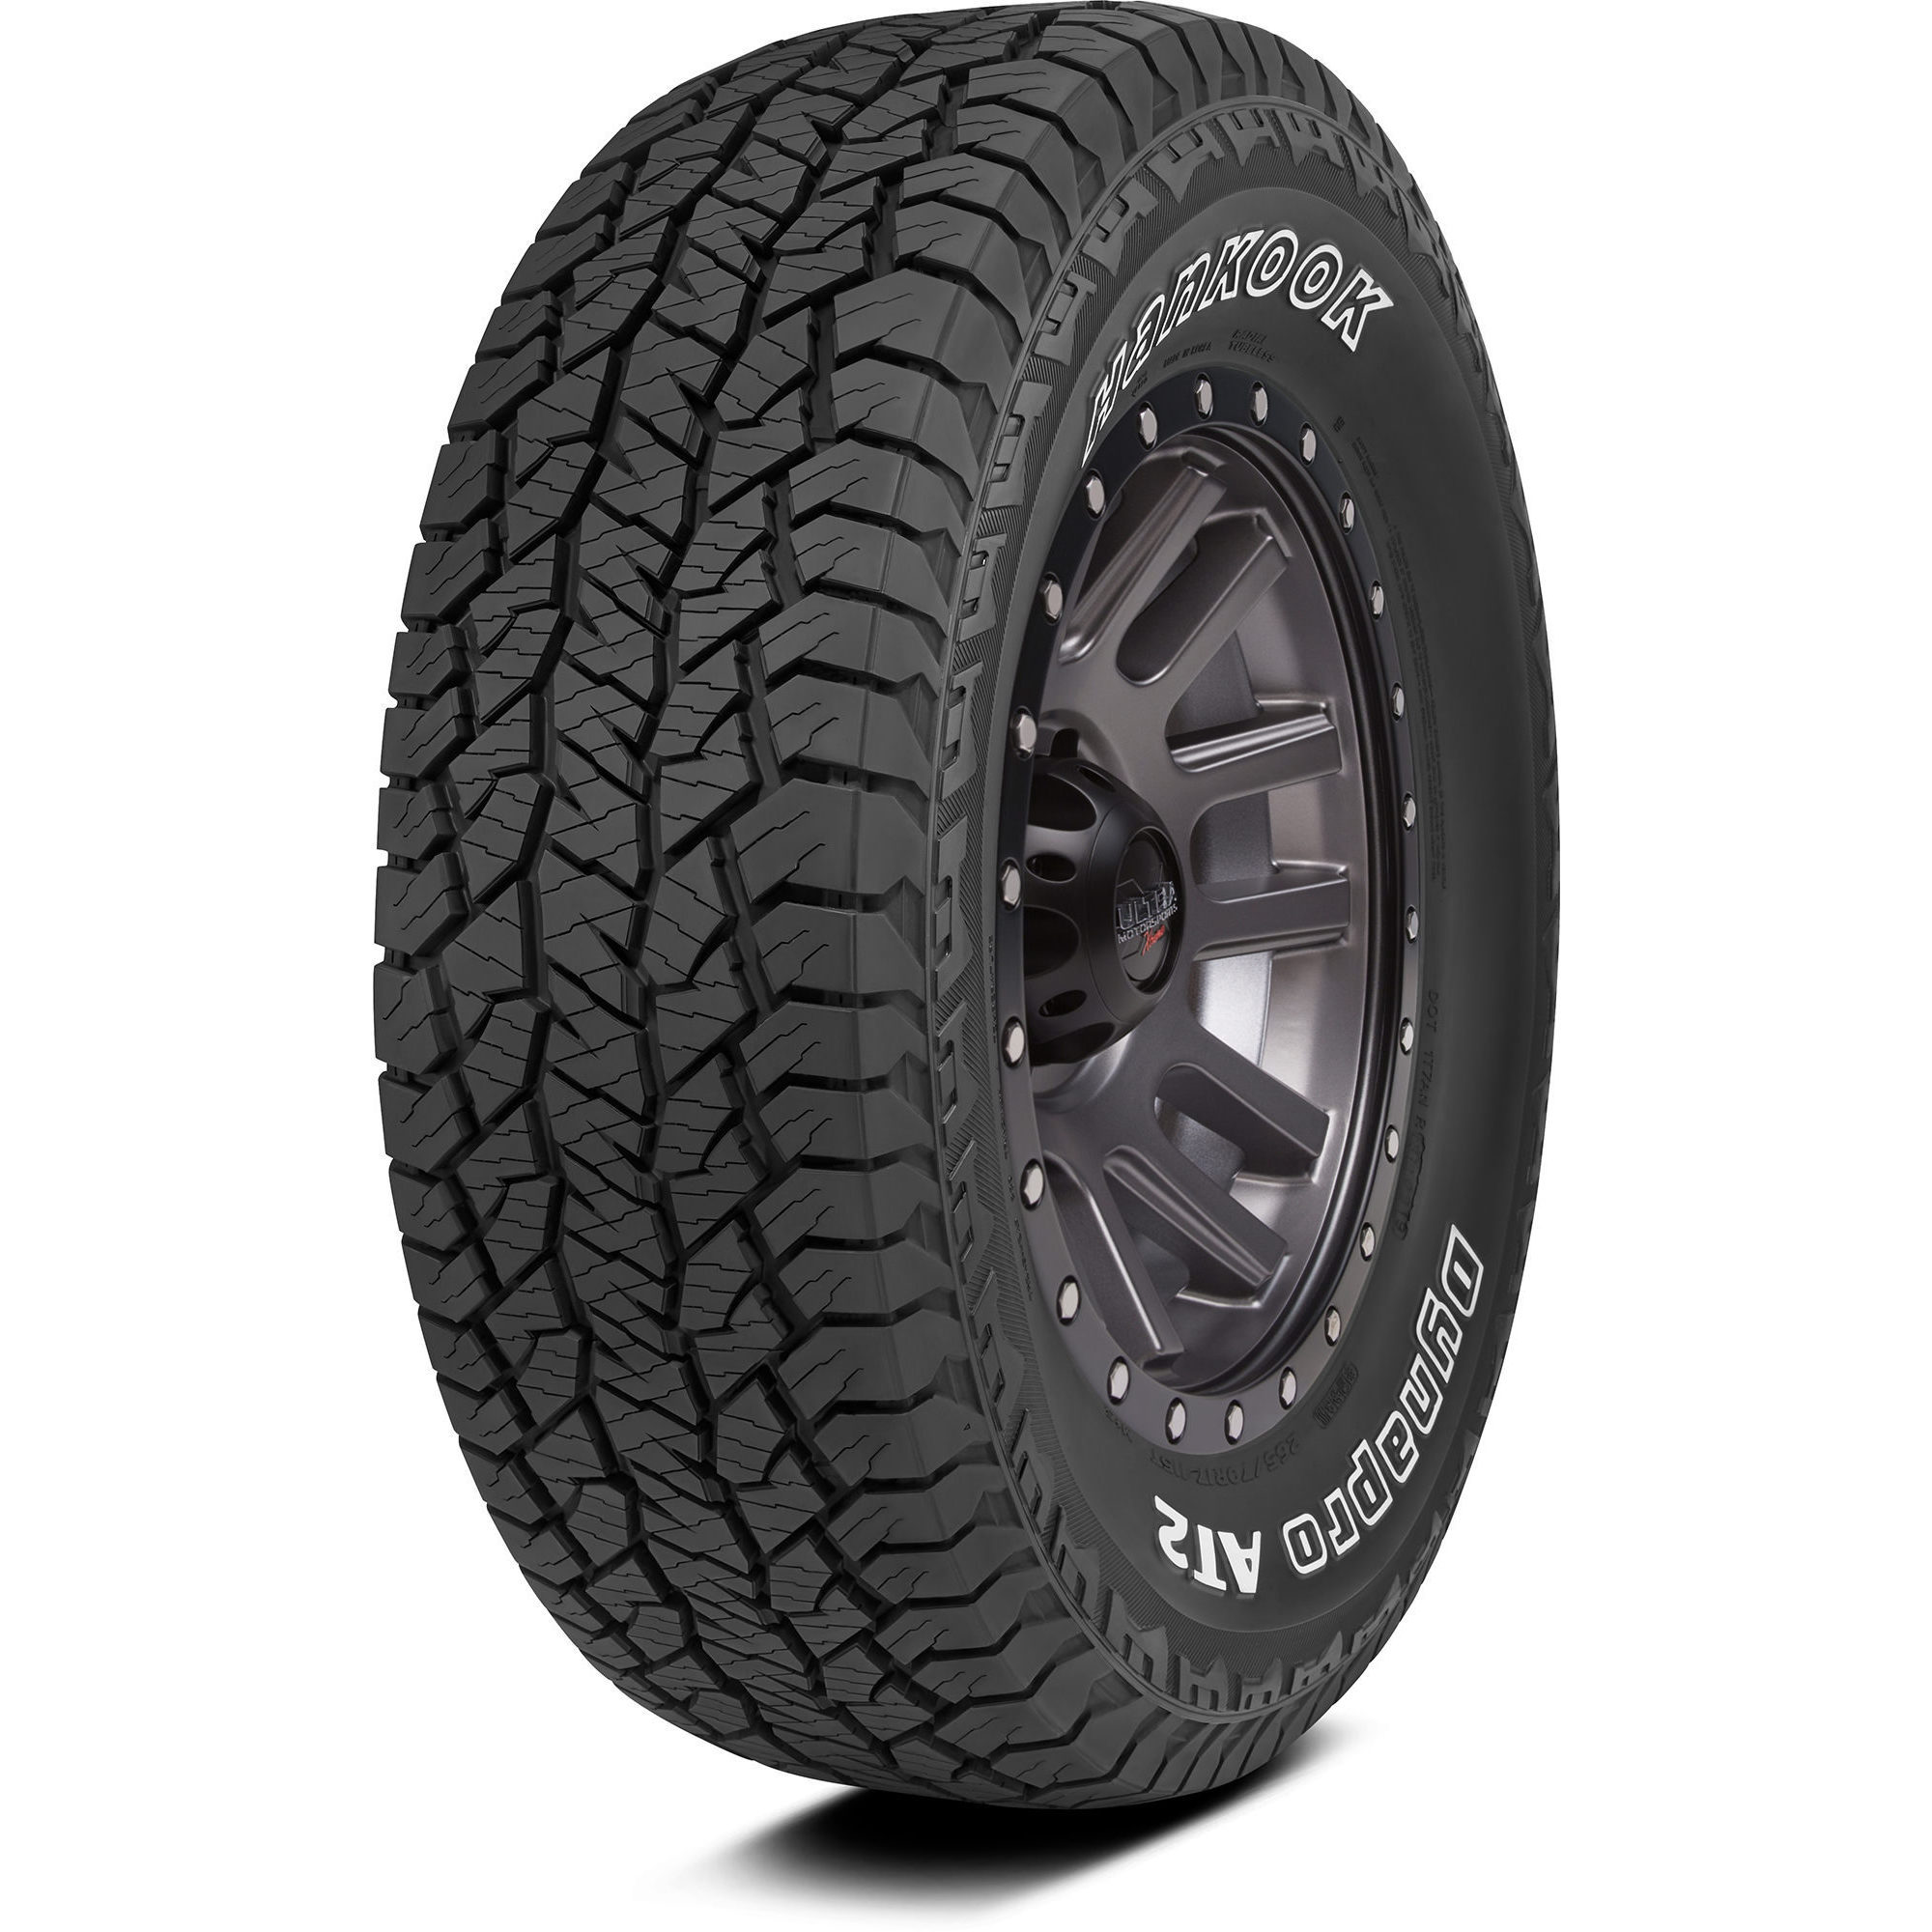 Hankook Dynapro AT2 - Tyre Reviews Tests and